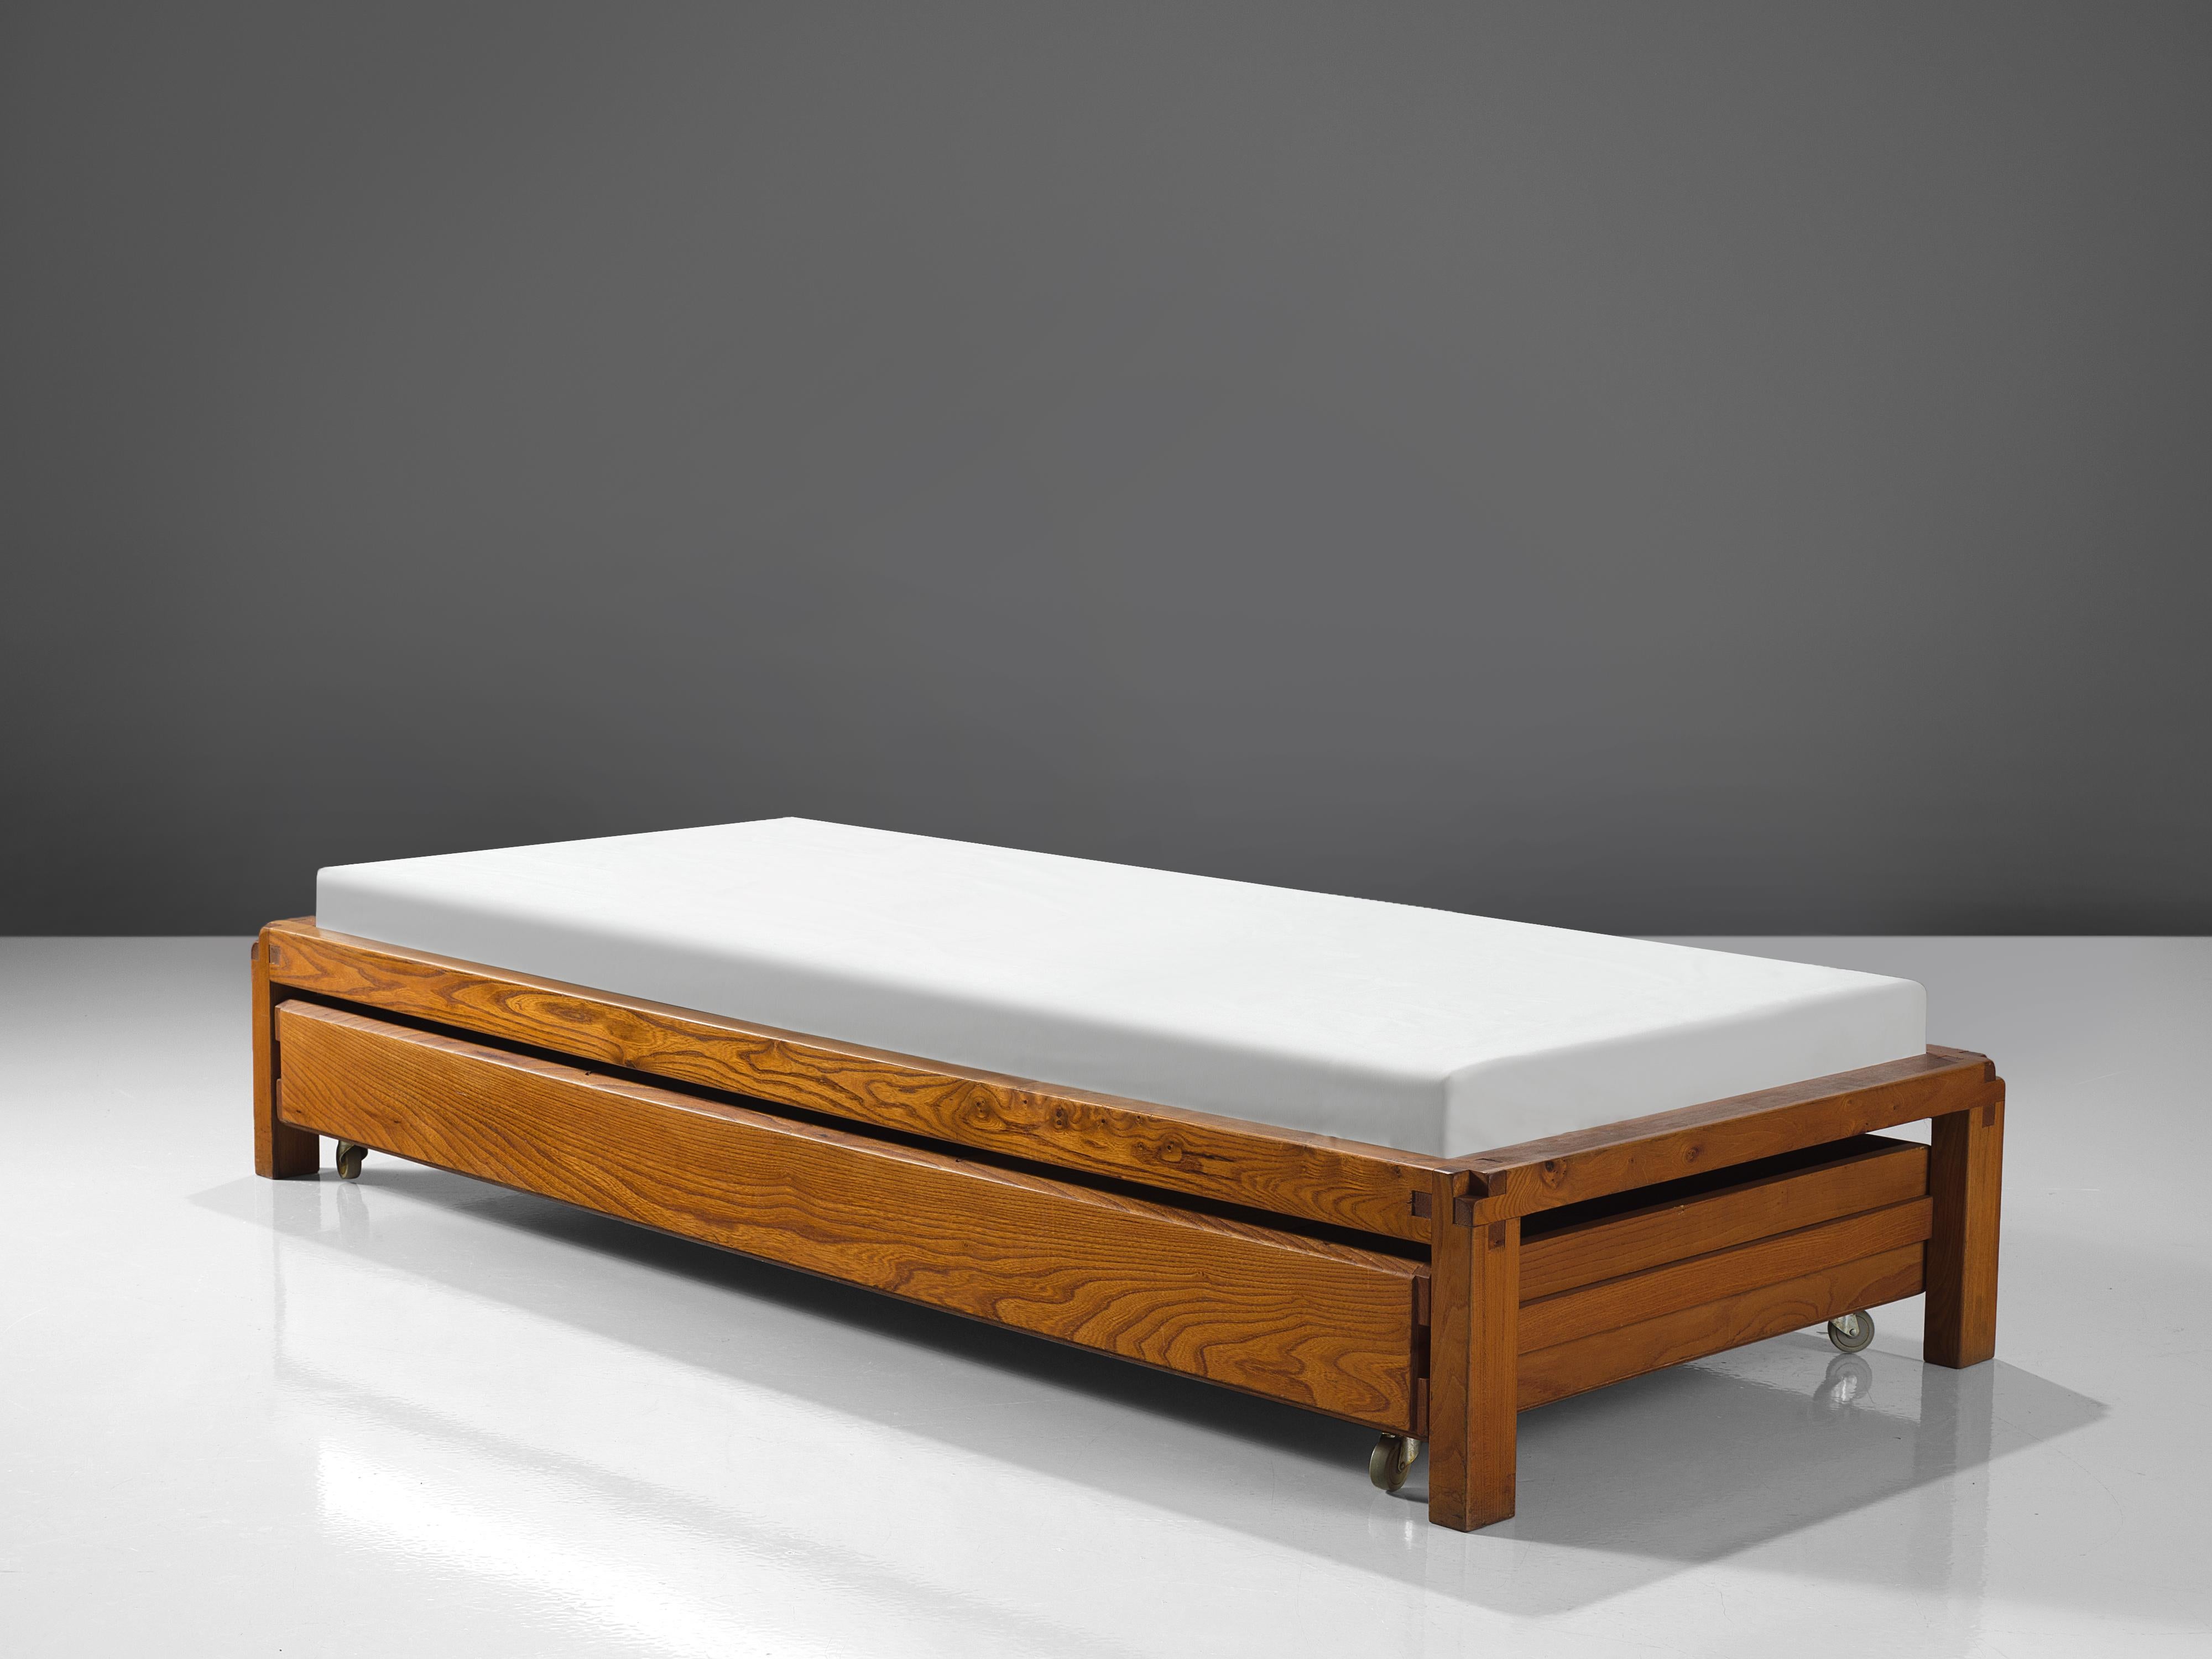 Pierre Chapo, bed with drawer, model L03, France, circa 1965. 

This bed is designed by Pierre Chapo in 1965. The bed has storage underneath in the shape of a large drawers with wheels. The bed features the handcrafted joints that the woodworker